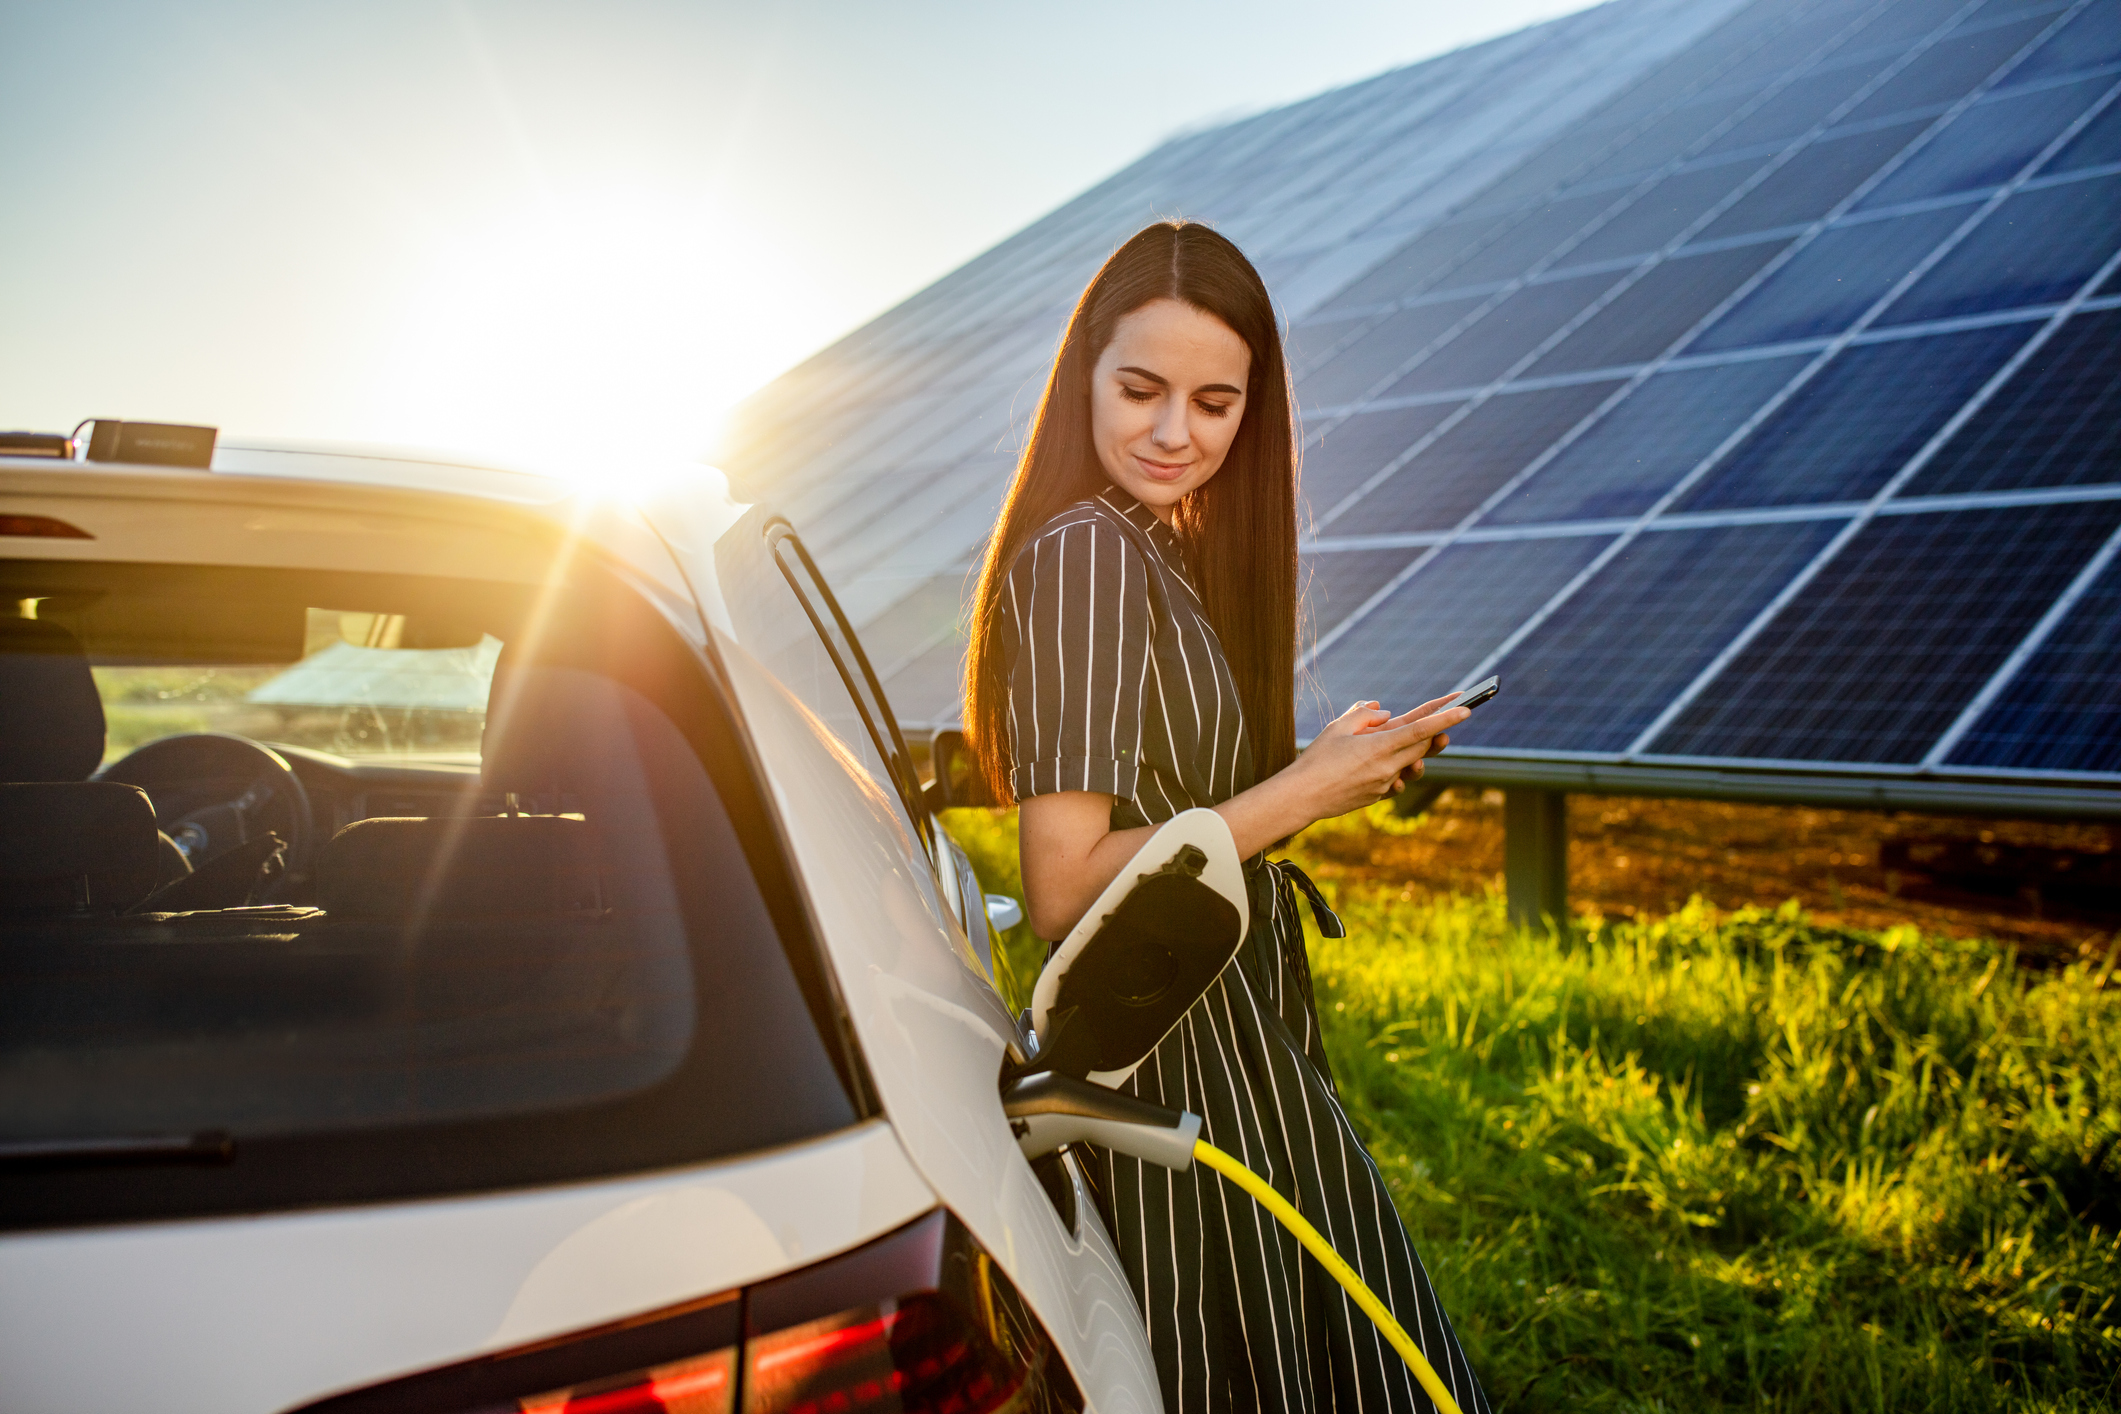 Waist up shot of a smiling young woman with black hair waiting for an electric car to charge and using a mobile phone with solar panels visible in the background